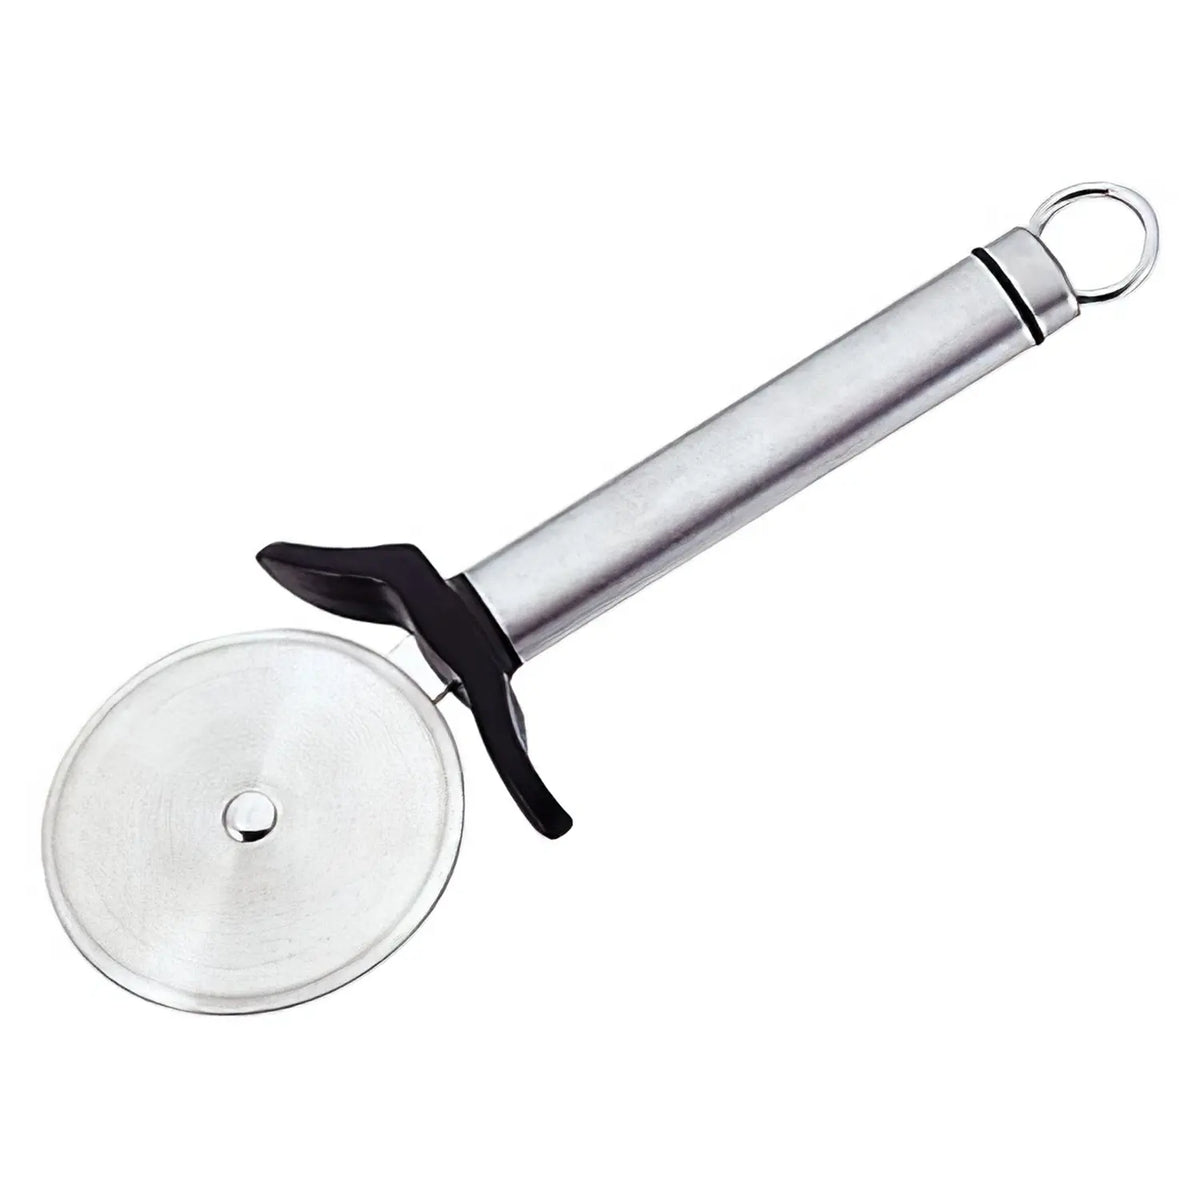 GS Home Products Chef Land Stainless Steel Pizza Wheel